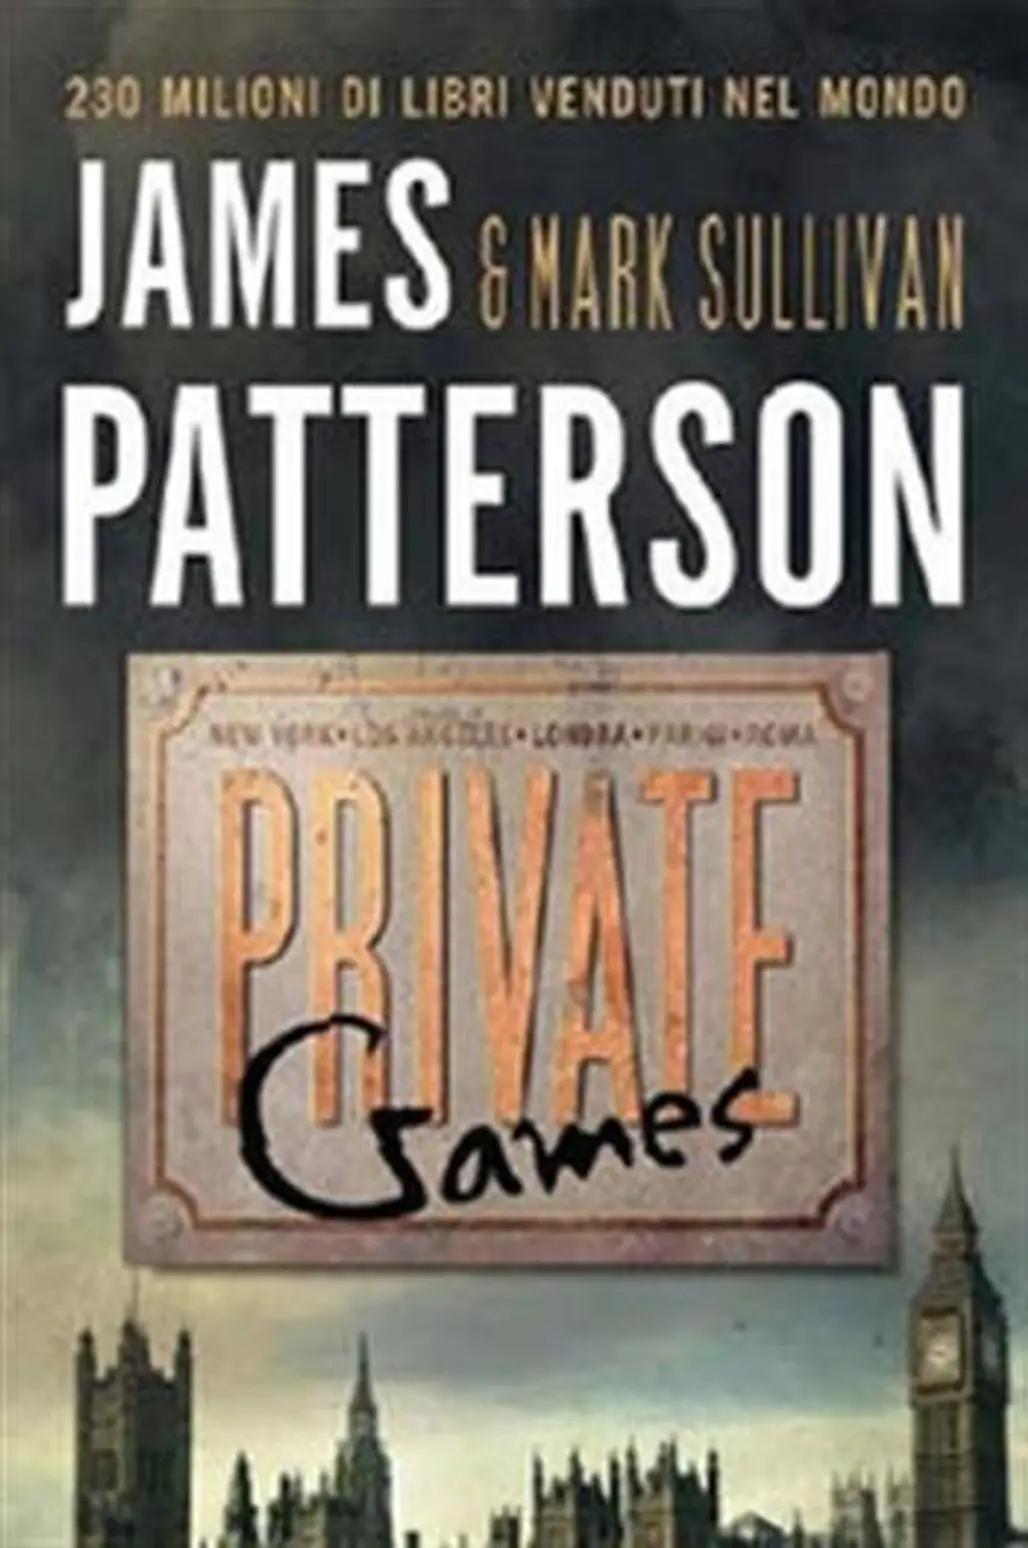 Private Games by James Patterson and Mark Sullivan